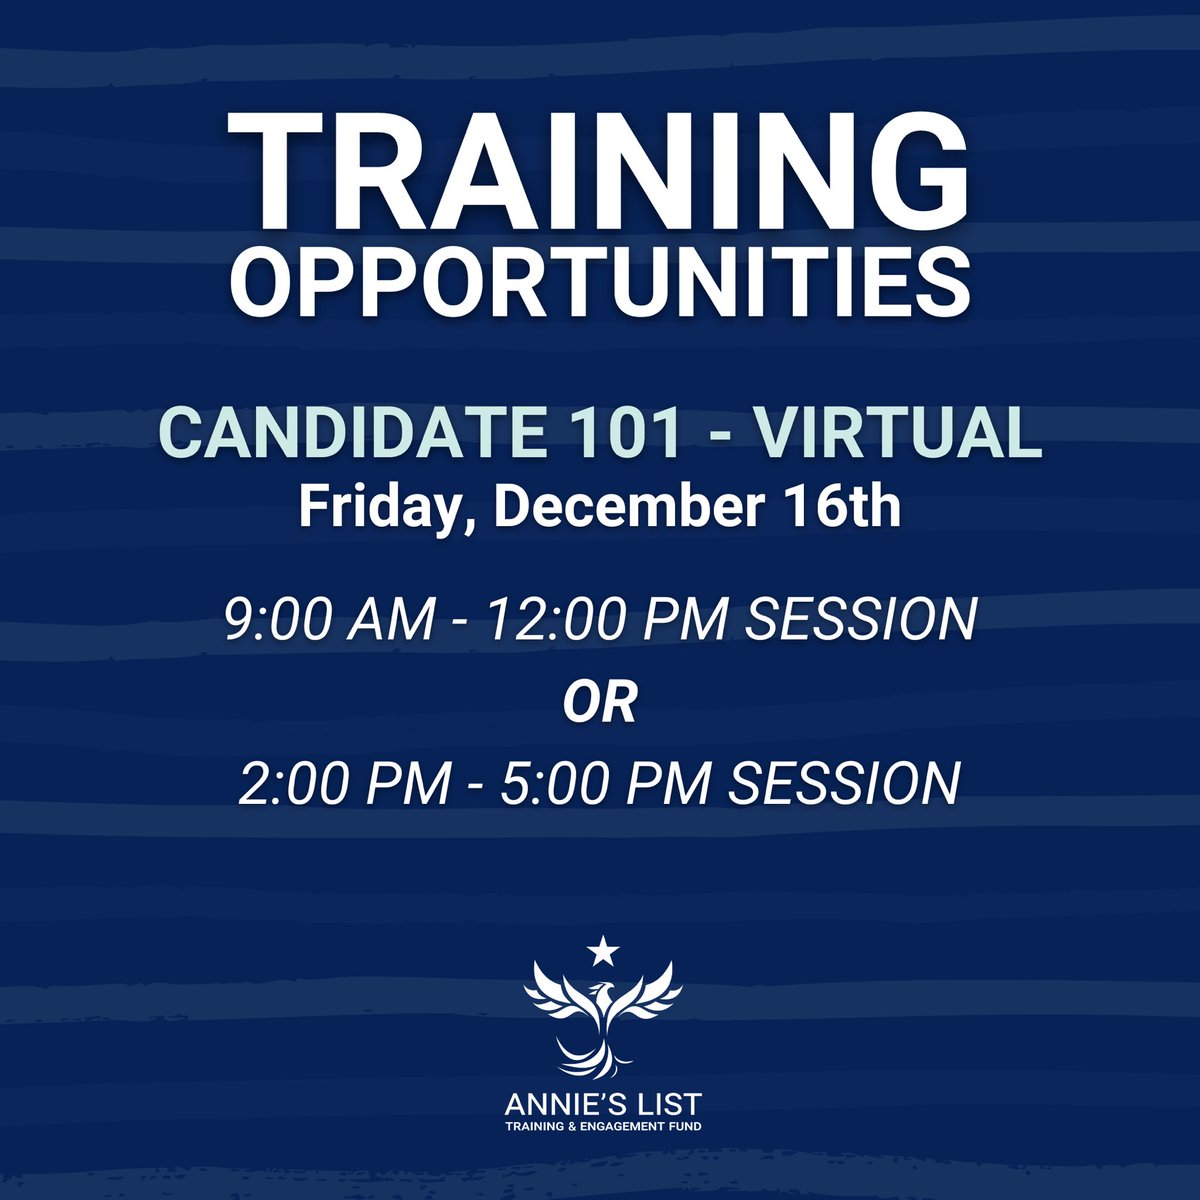 🚨🚨 TRAINING ALERT: Kick off your path to elected office with us at our virtual Candidate 101 training next Friday, Dec. 16th! #TrainRunLead 

Register here: bit.ly/3FBcKbn